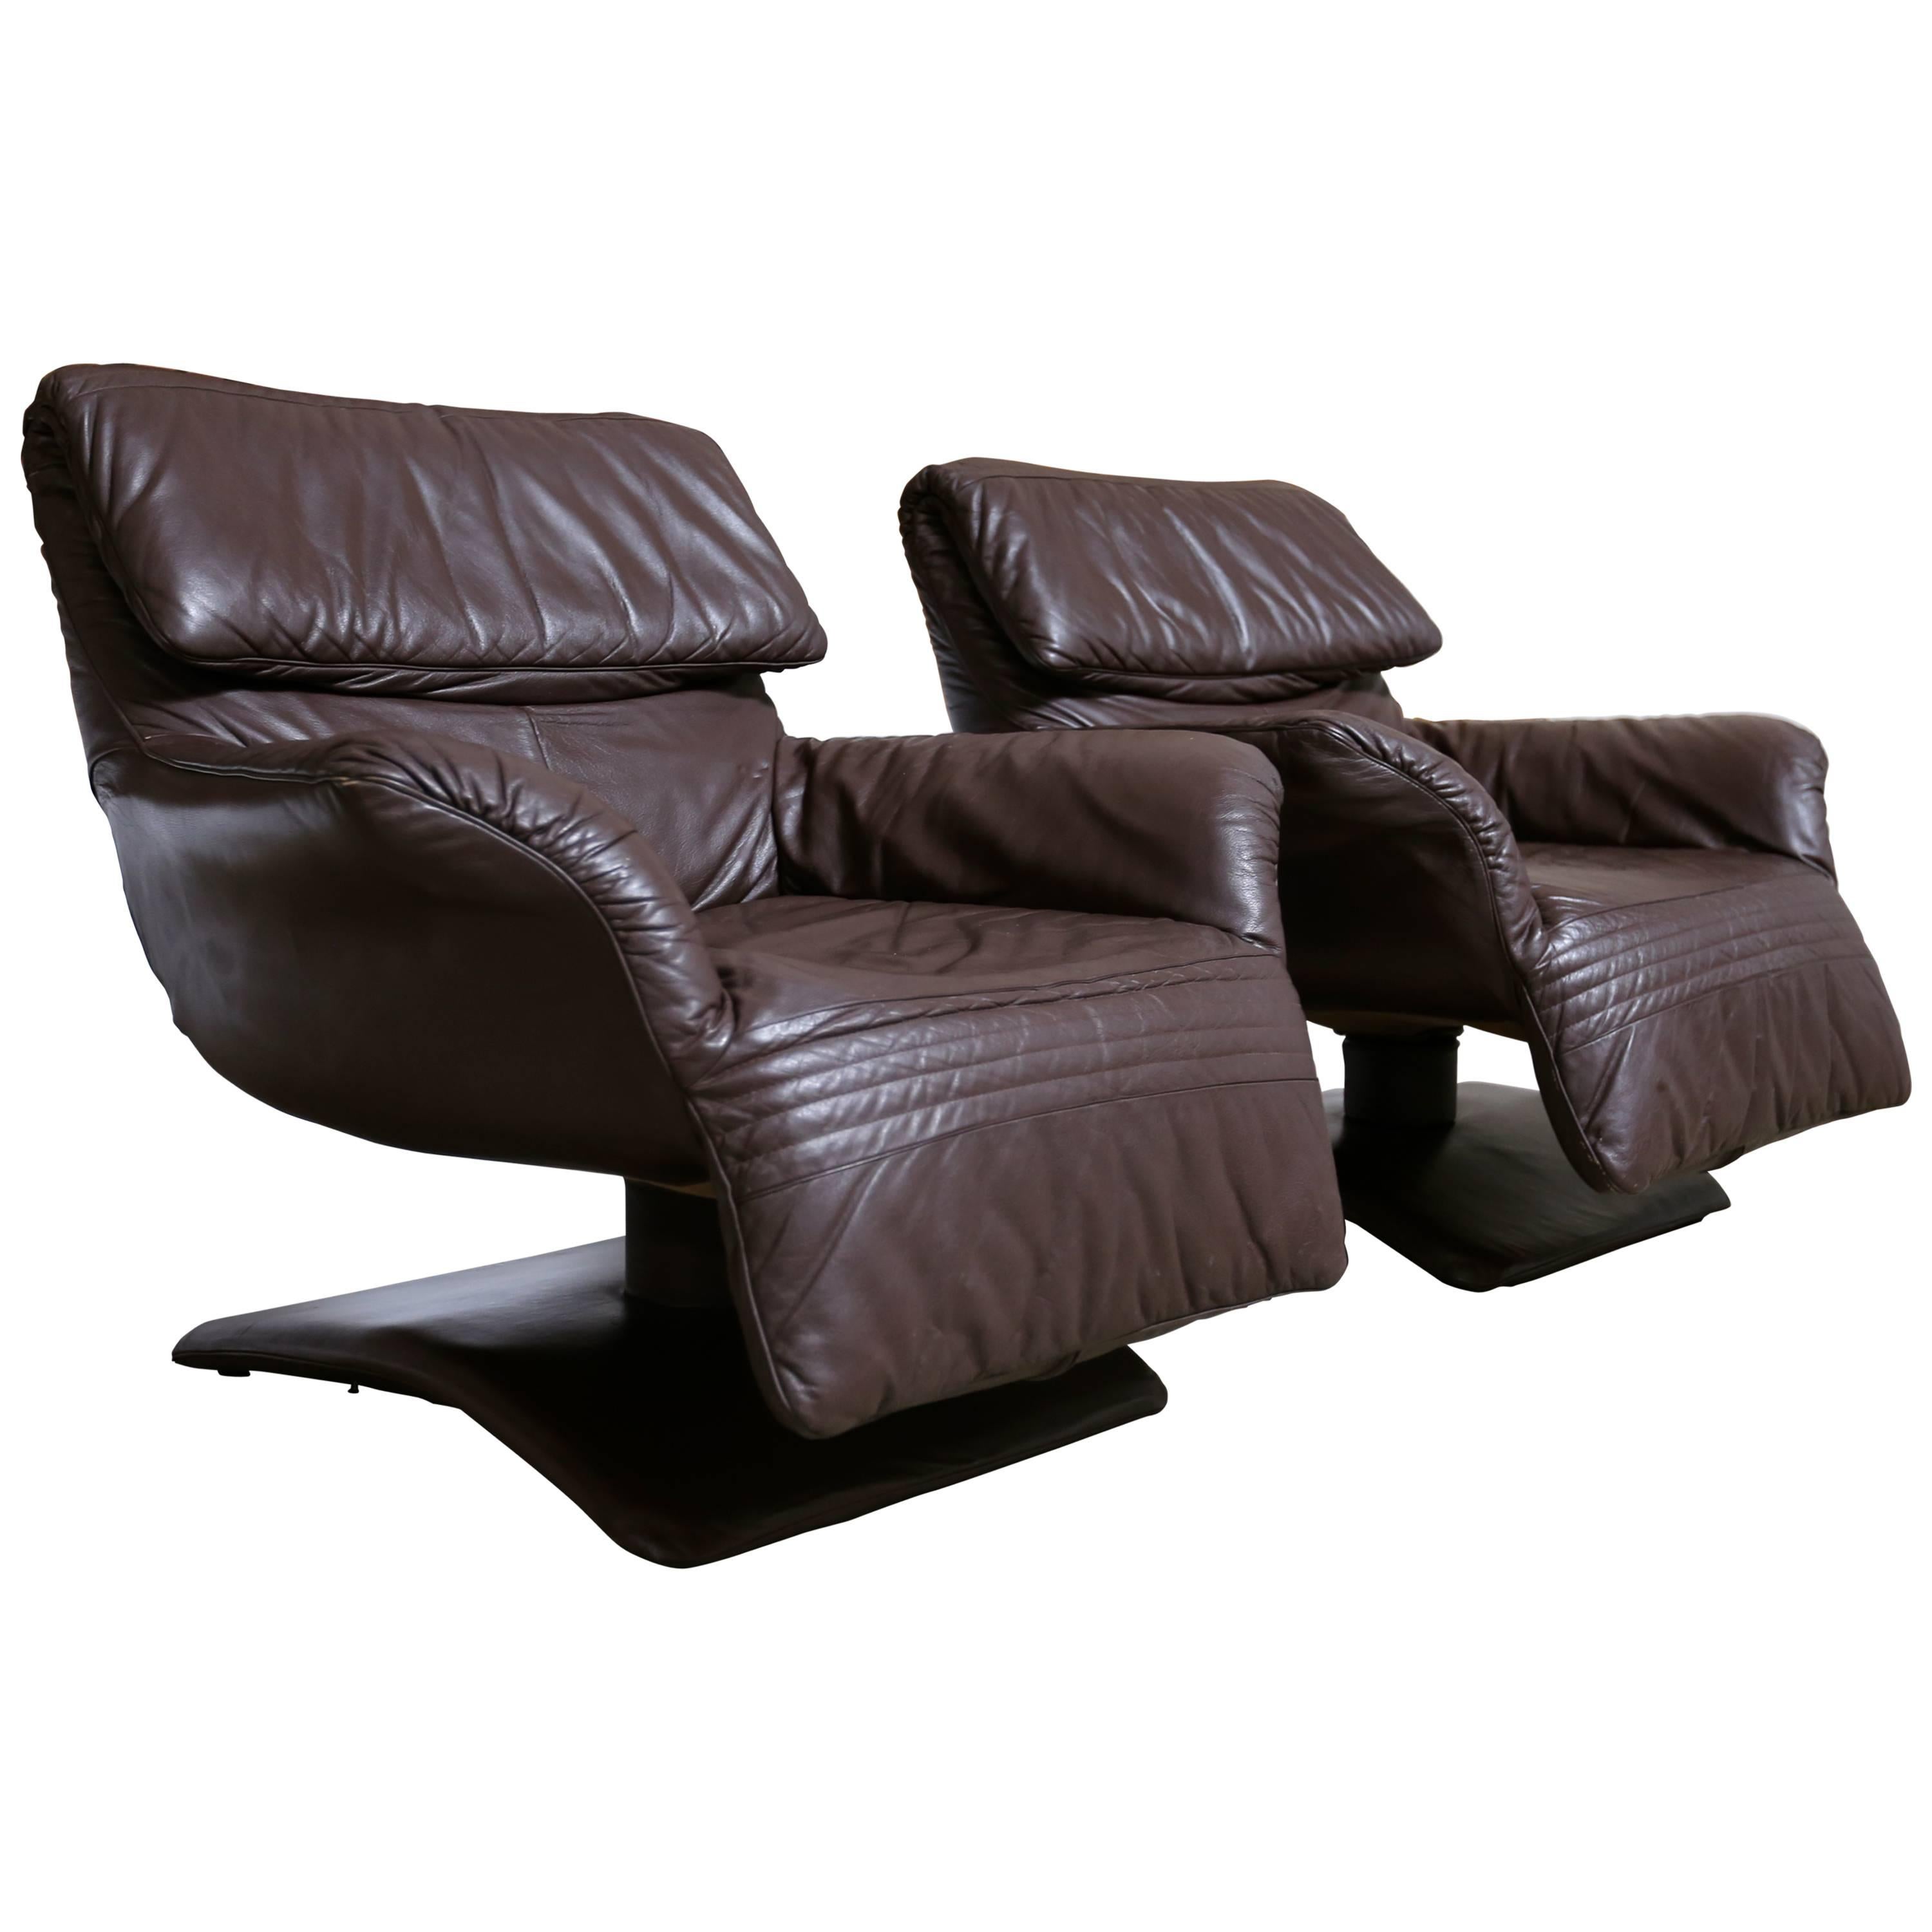 Pair of Leather Swivel Lounge Chairs